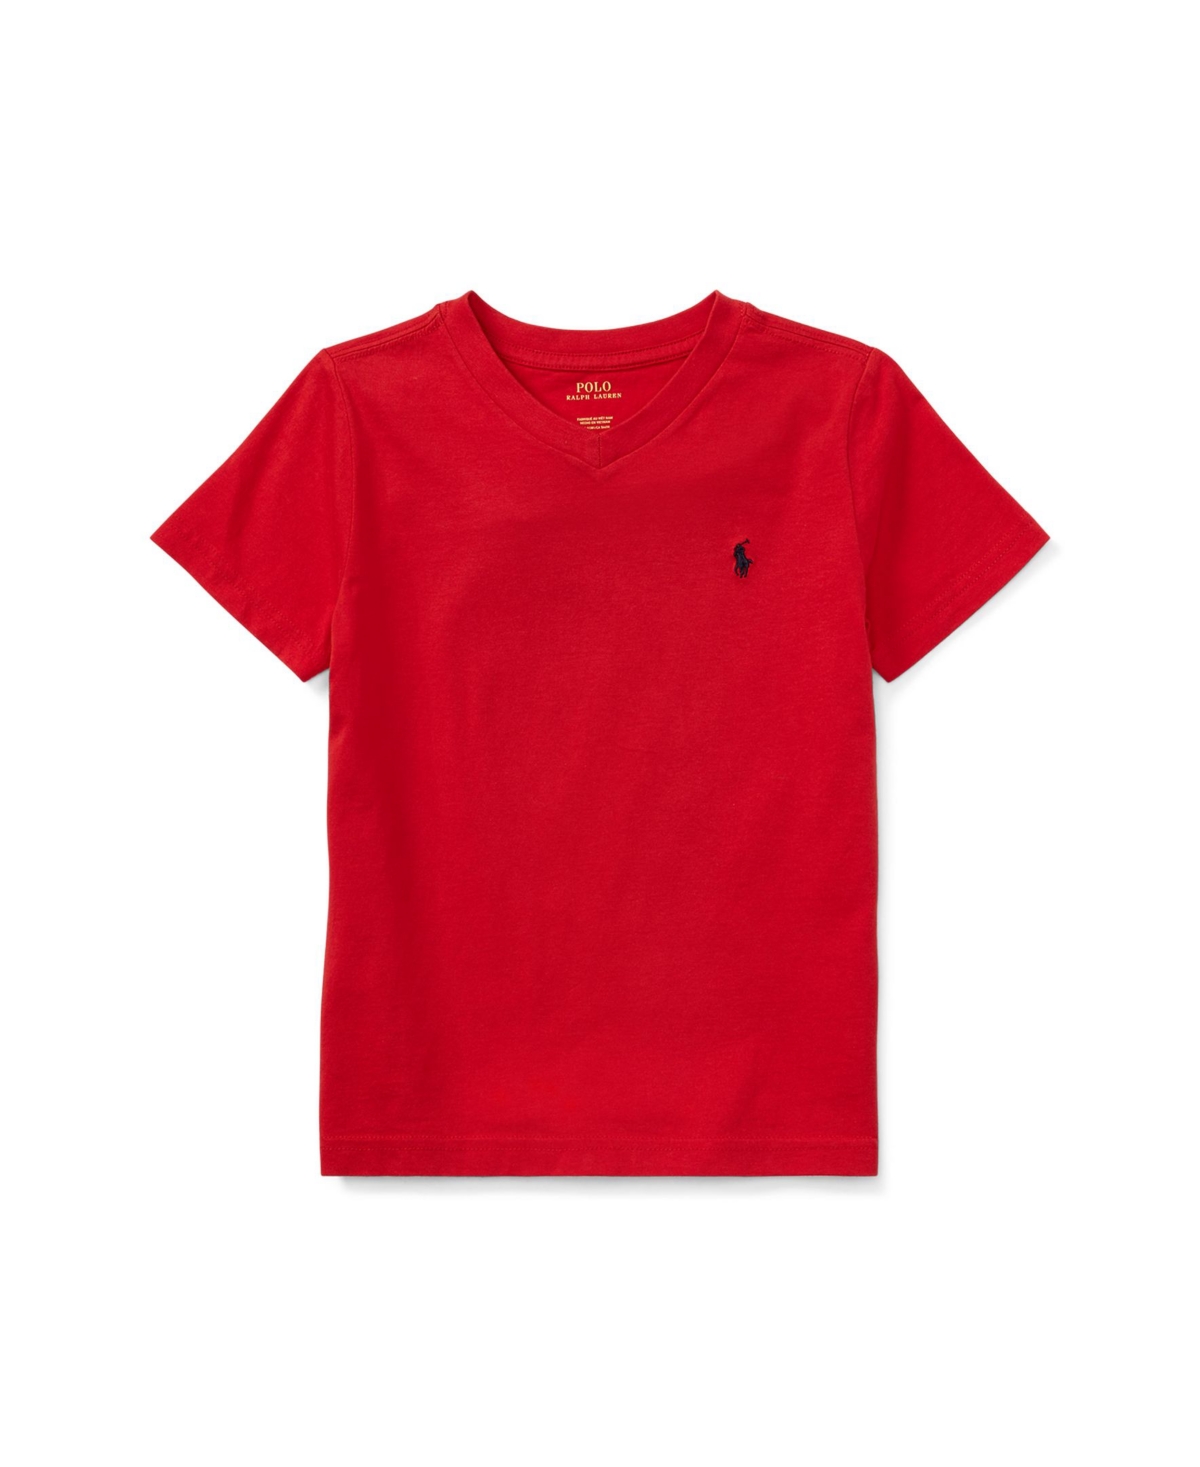 Polo Ralph Lauren Kids' Toddler And Little Boys Cotton Jersey V-neck T-shirt In Rl Red